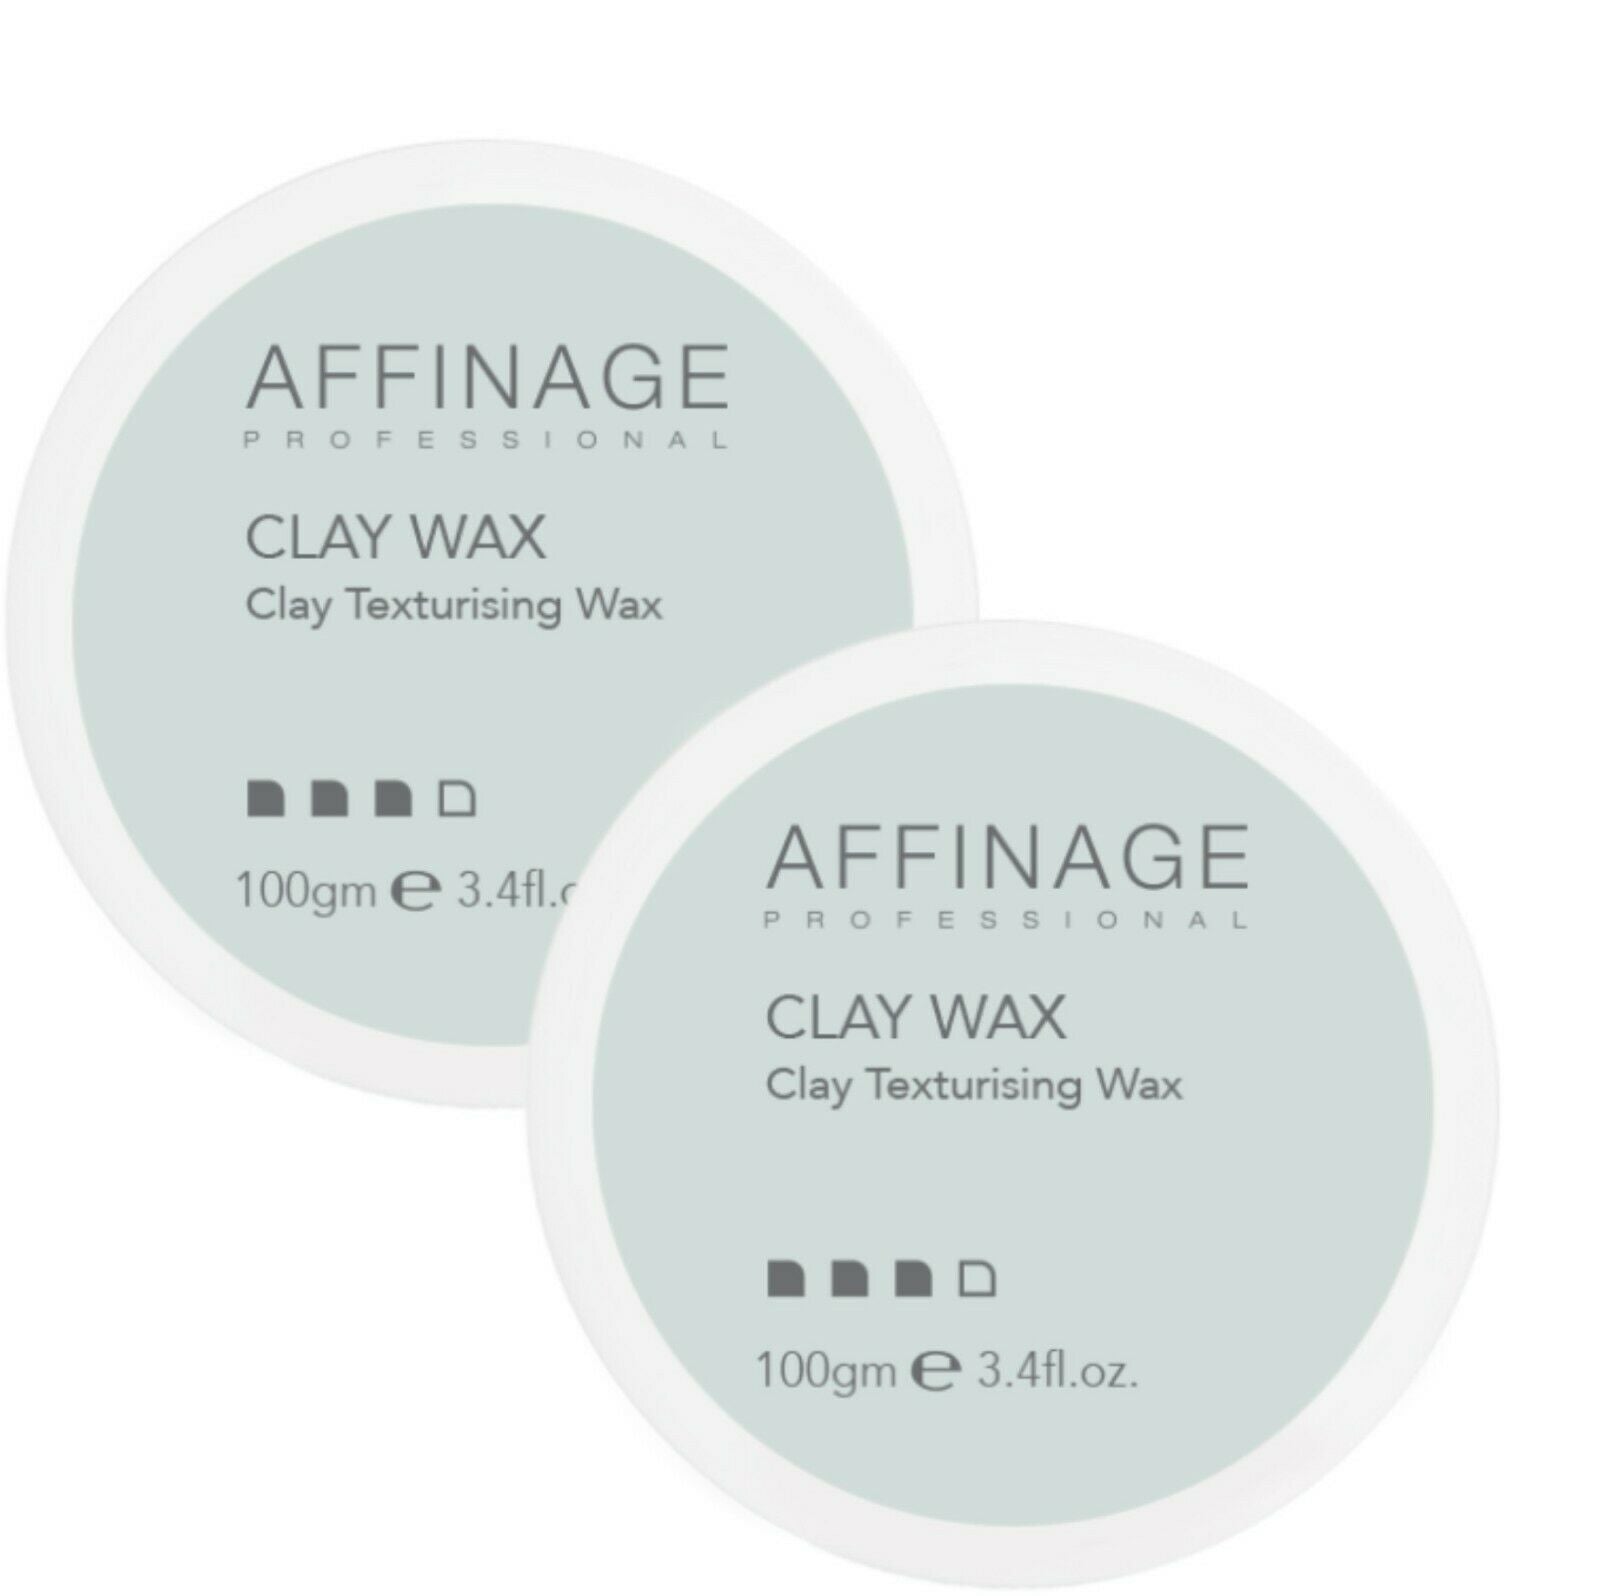 Affinage Professional Clay Texturising Wax 100ml Duo - 2 x 100ml - On Line Hair Depot